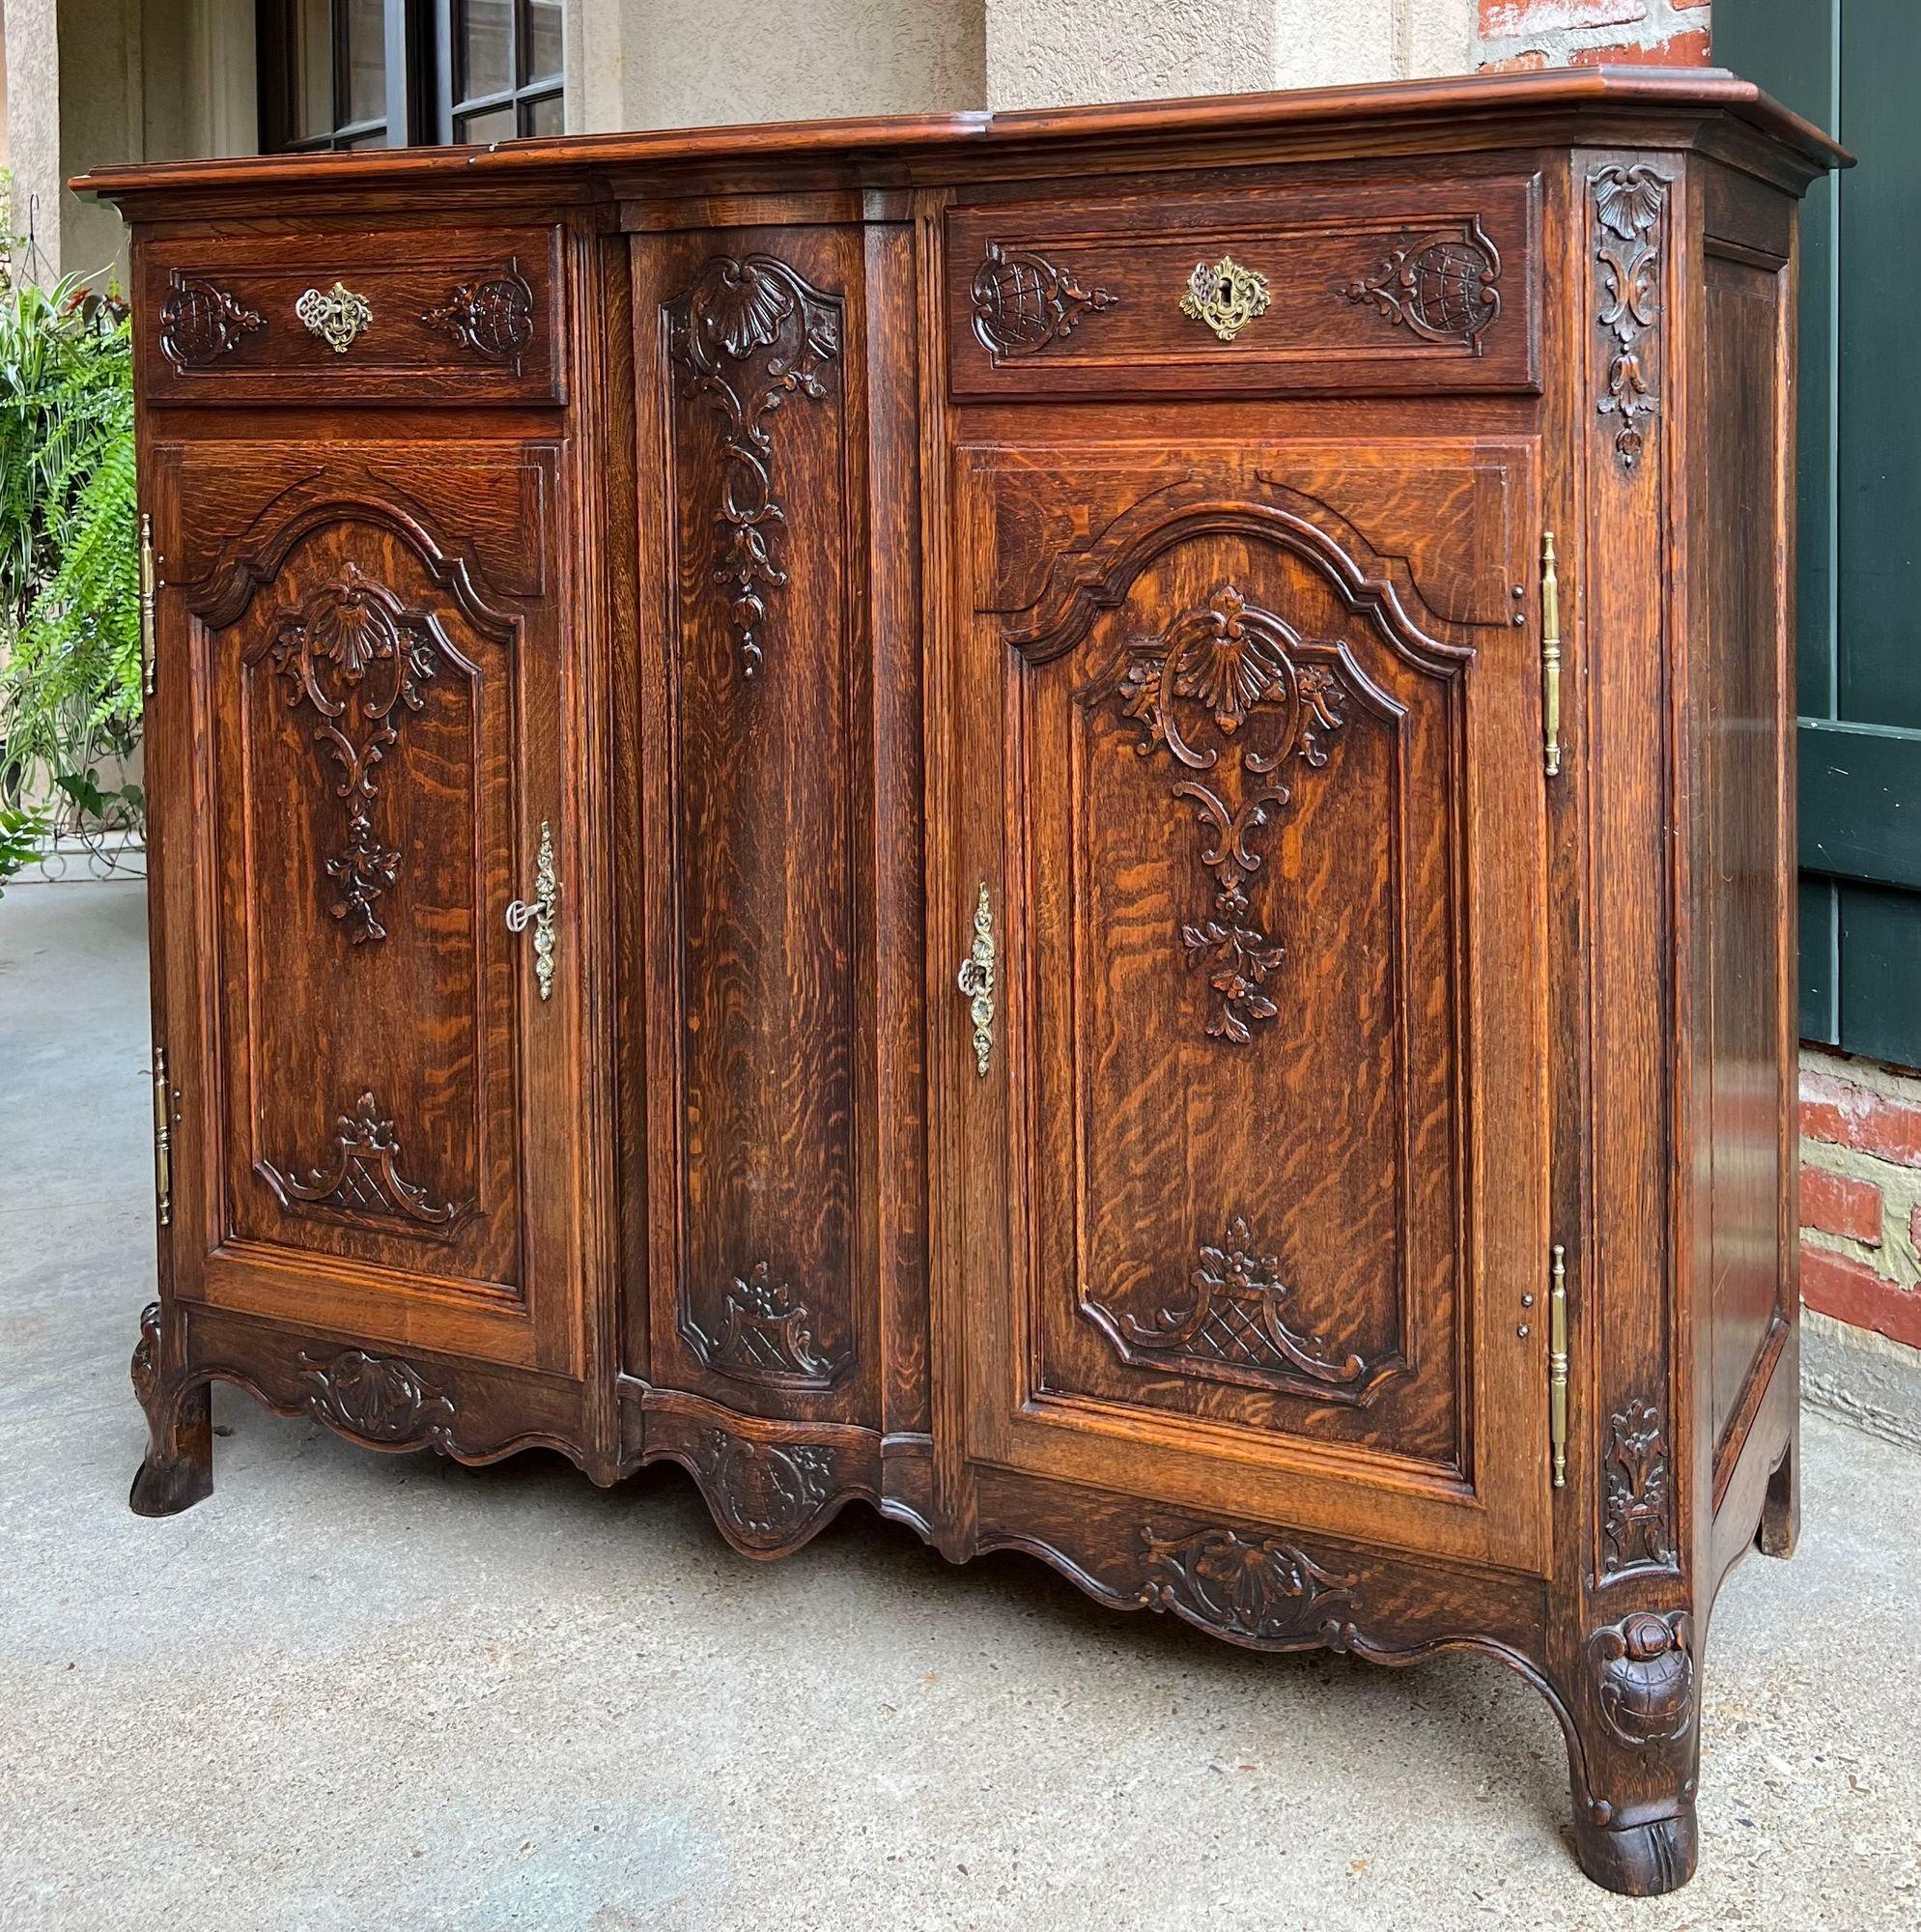 French Provincial Antique French Sideboard Foyer Cabinet Louis XV Carved Tiger Oak, 19th Century For Sale